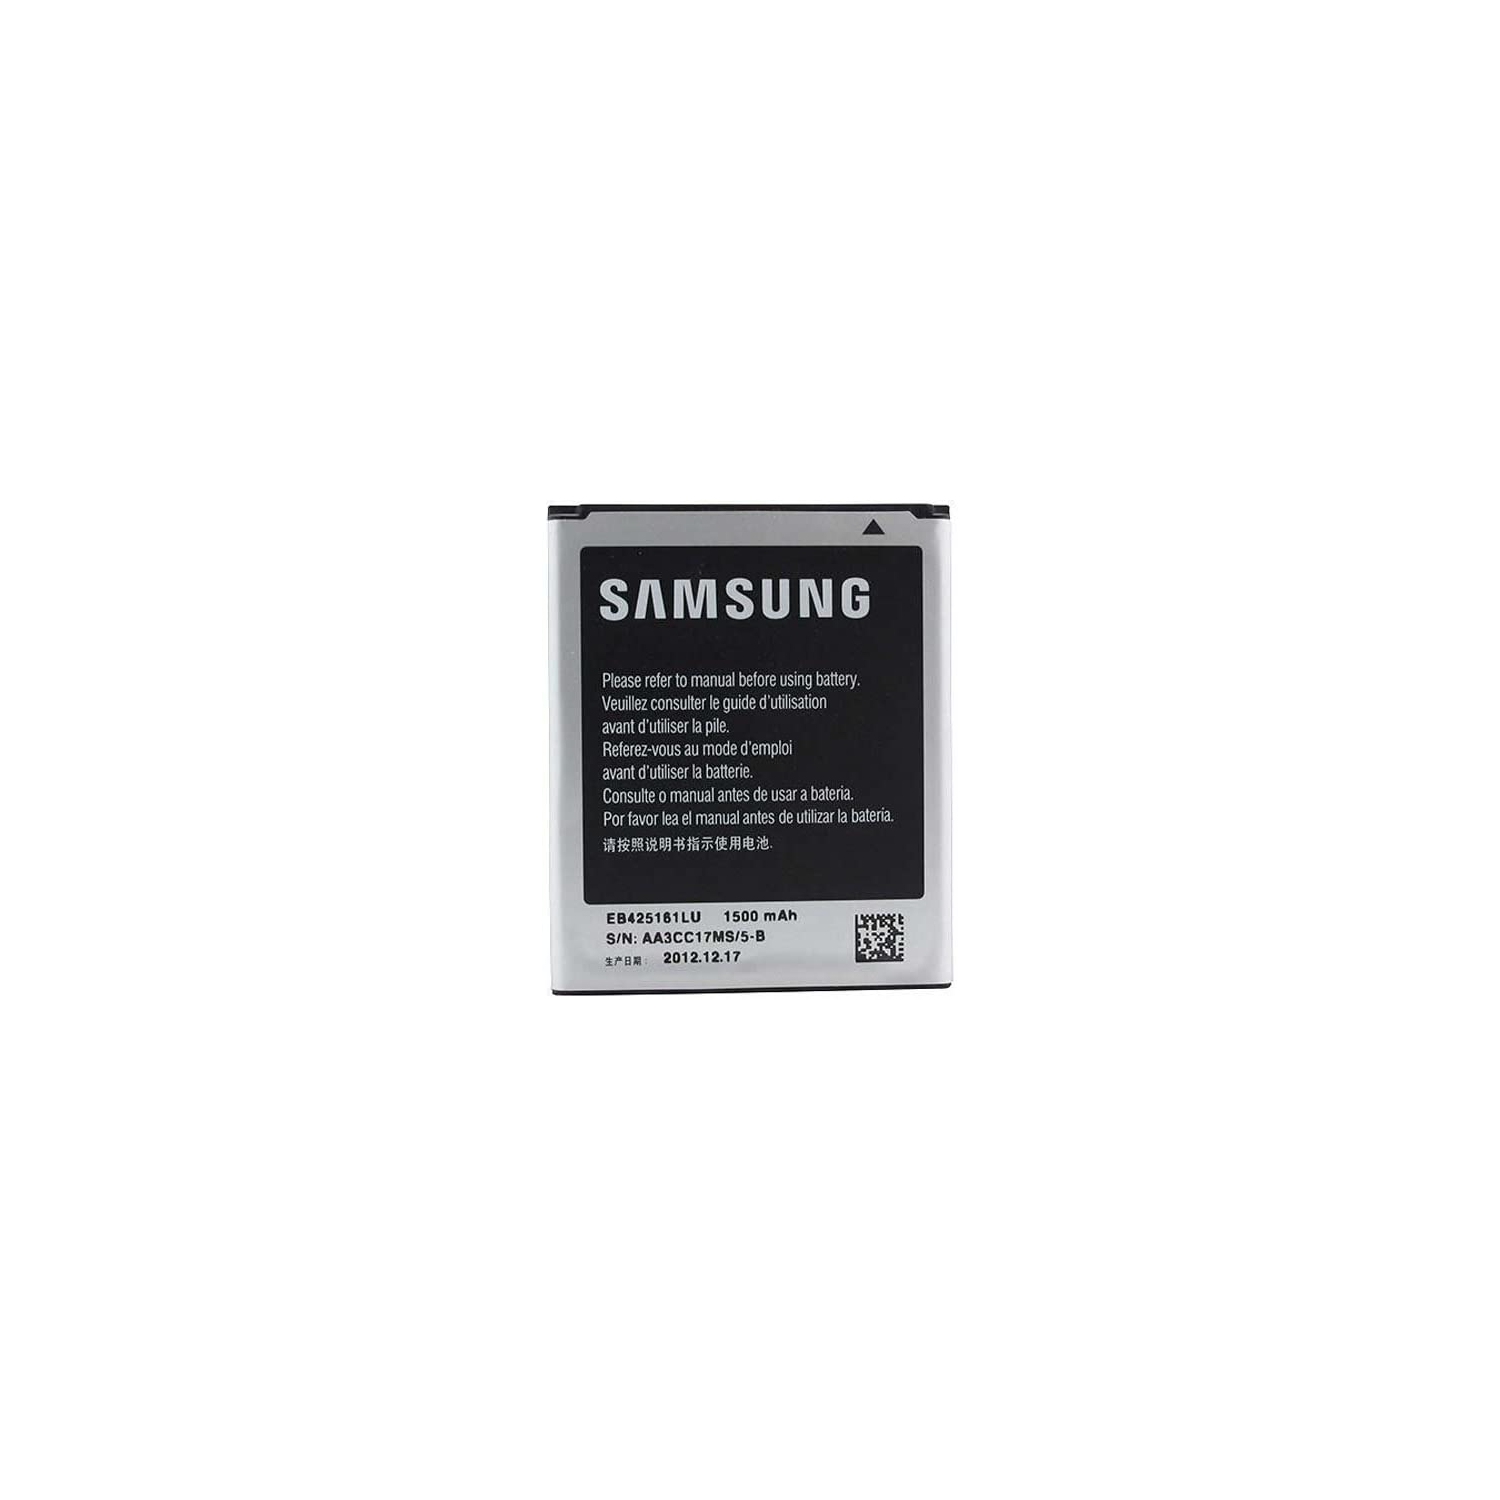 Cableshark for Replacement Battery Samsung Compatible Galaxy S III Mini I8190, Duos S7562, ACE II GT-I860, ACE II X S7560M ( EB425161LU ) (FREE SHIPPING)